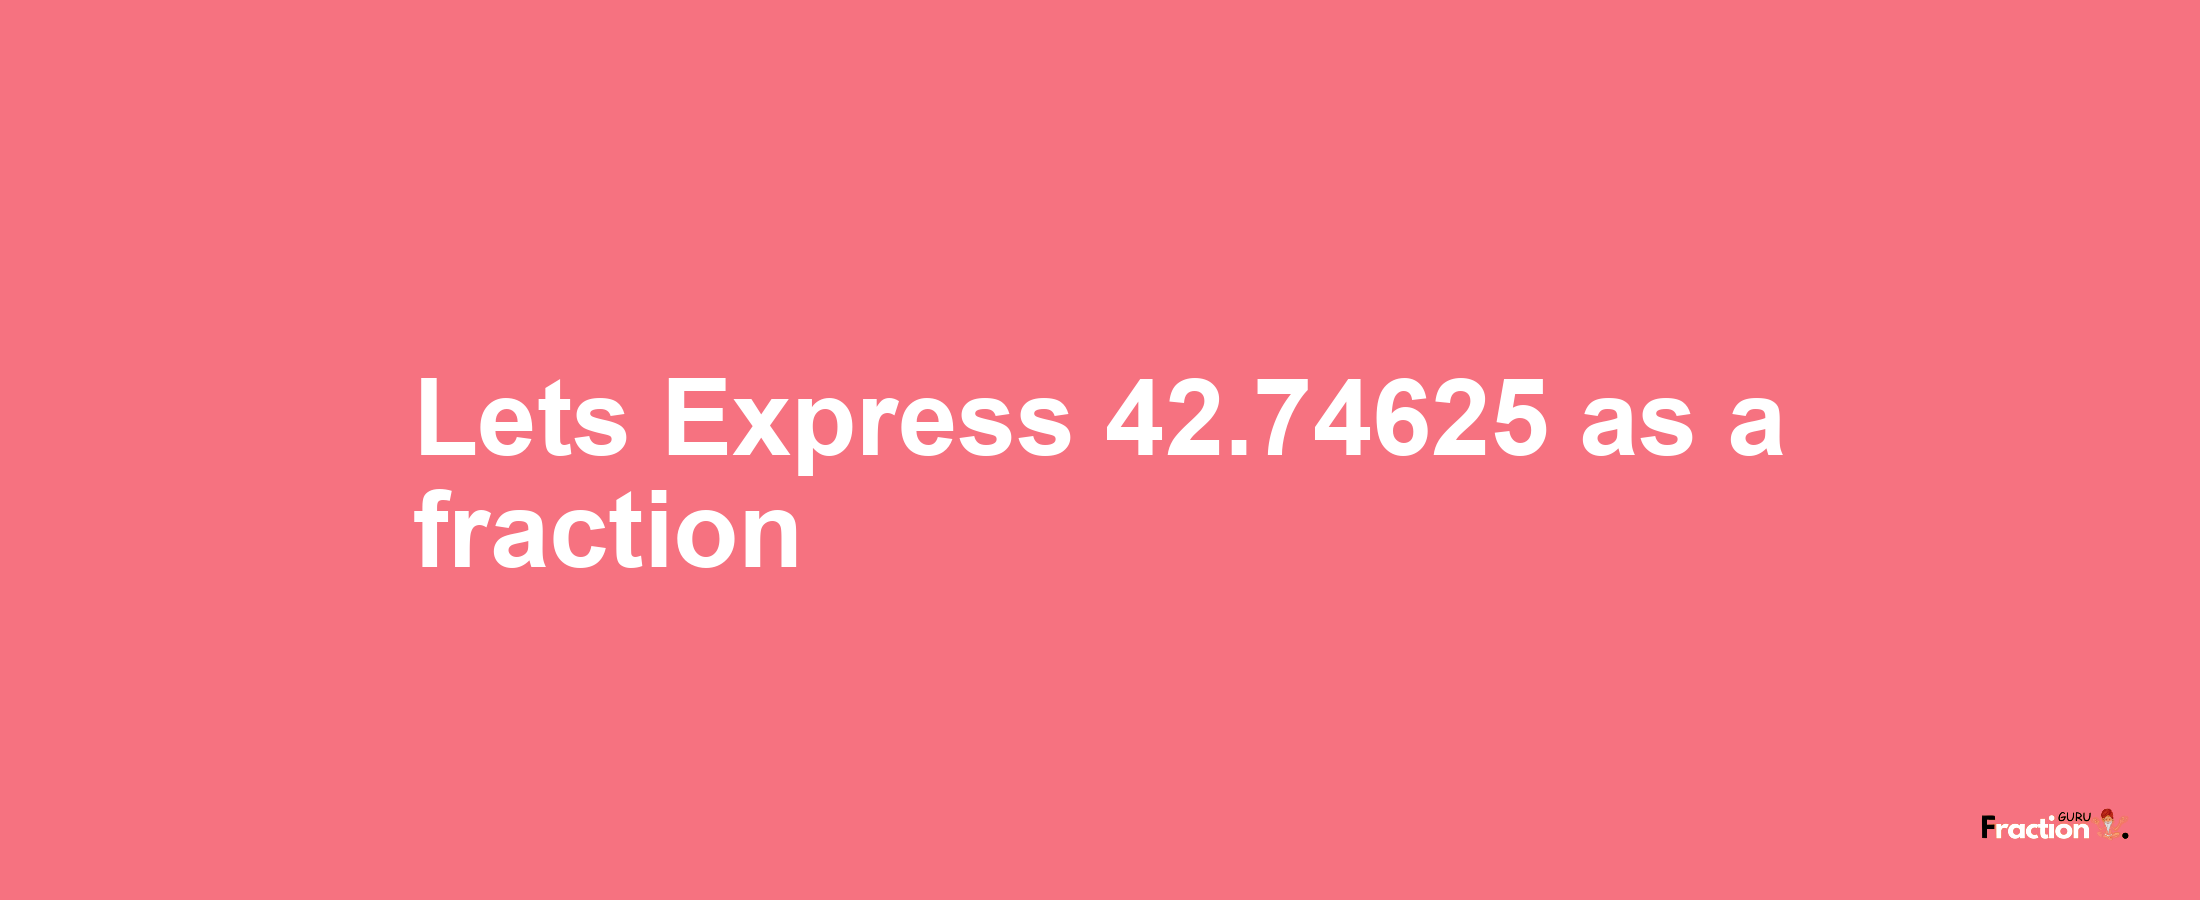 Lets Express 42.74625 as afraction